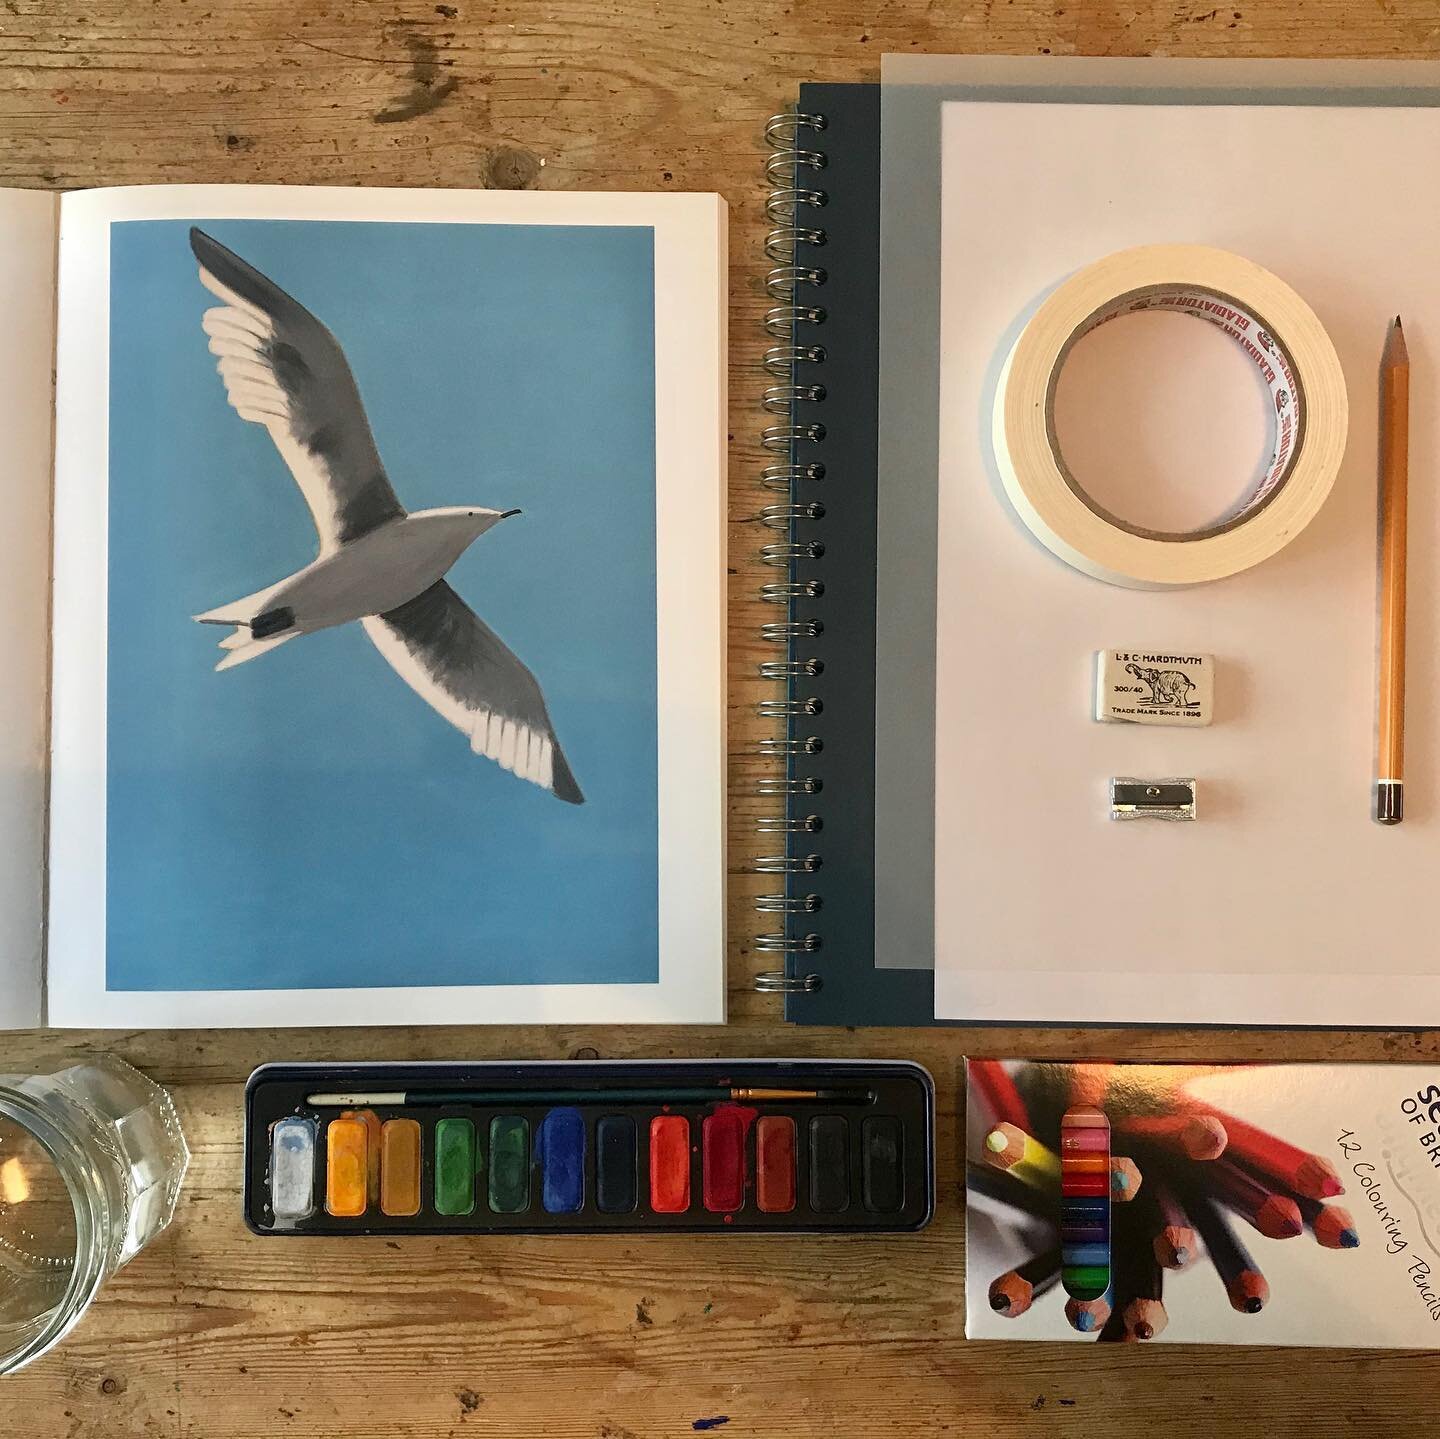 There was something very calming about setting up this activity and tracing the outline of this seagull over and over again.. Putting together a series of video tutorials with @abigail.leeks &amp; @_lucy_ferguson_  for NIWBH.org. Picturing a beautifu